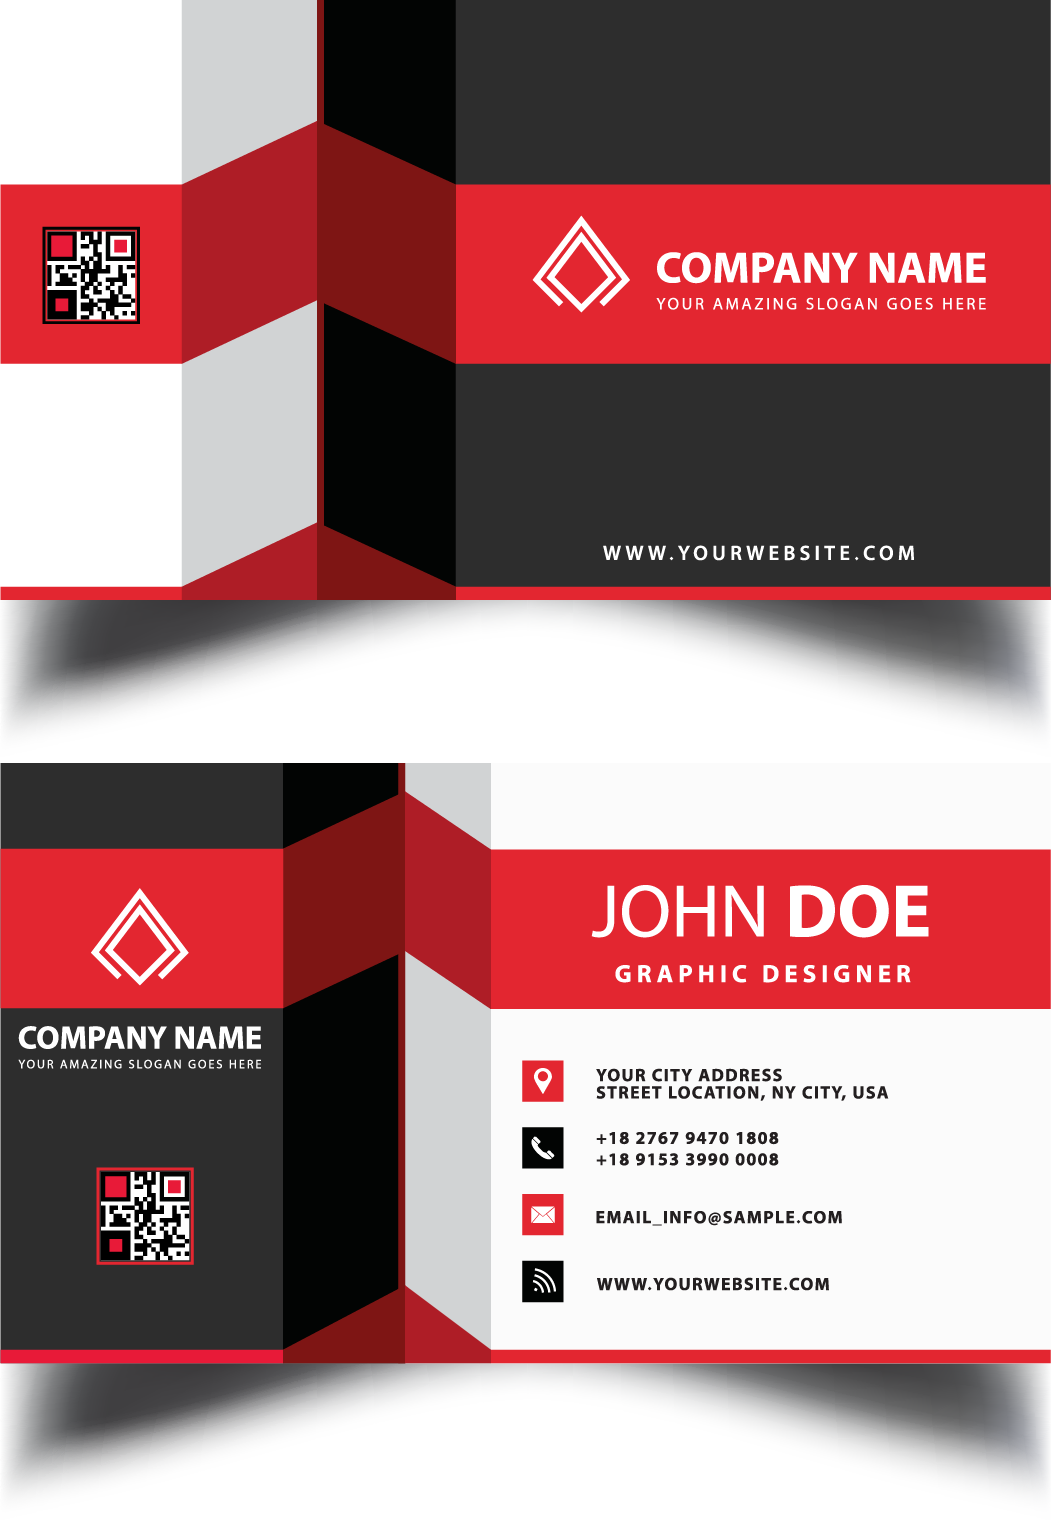 Graphic Design Card Business Visiting HD Image Free PNG PNG Image